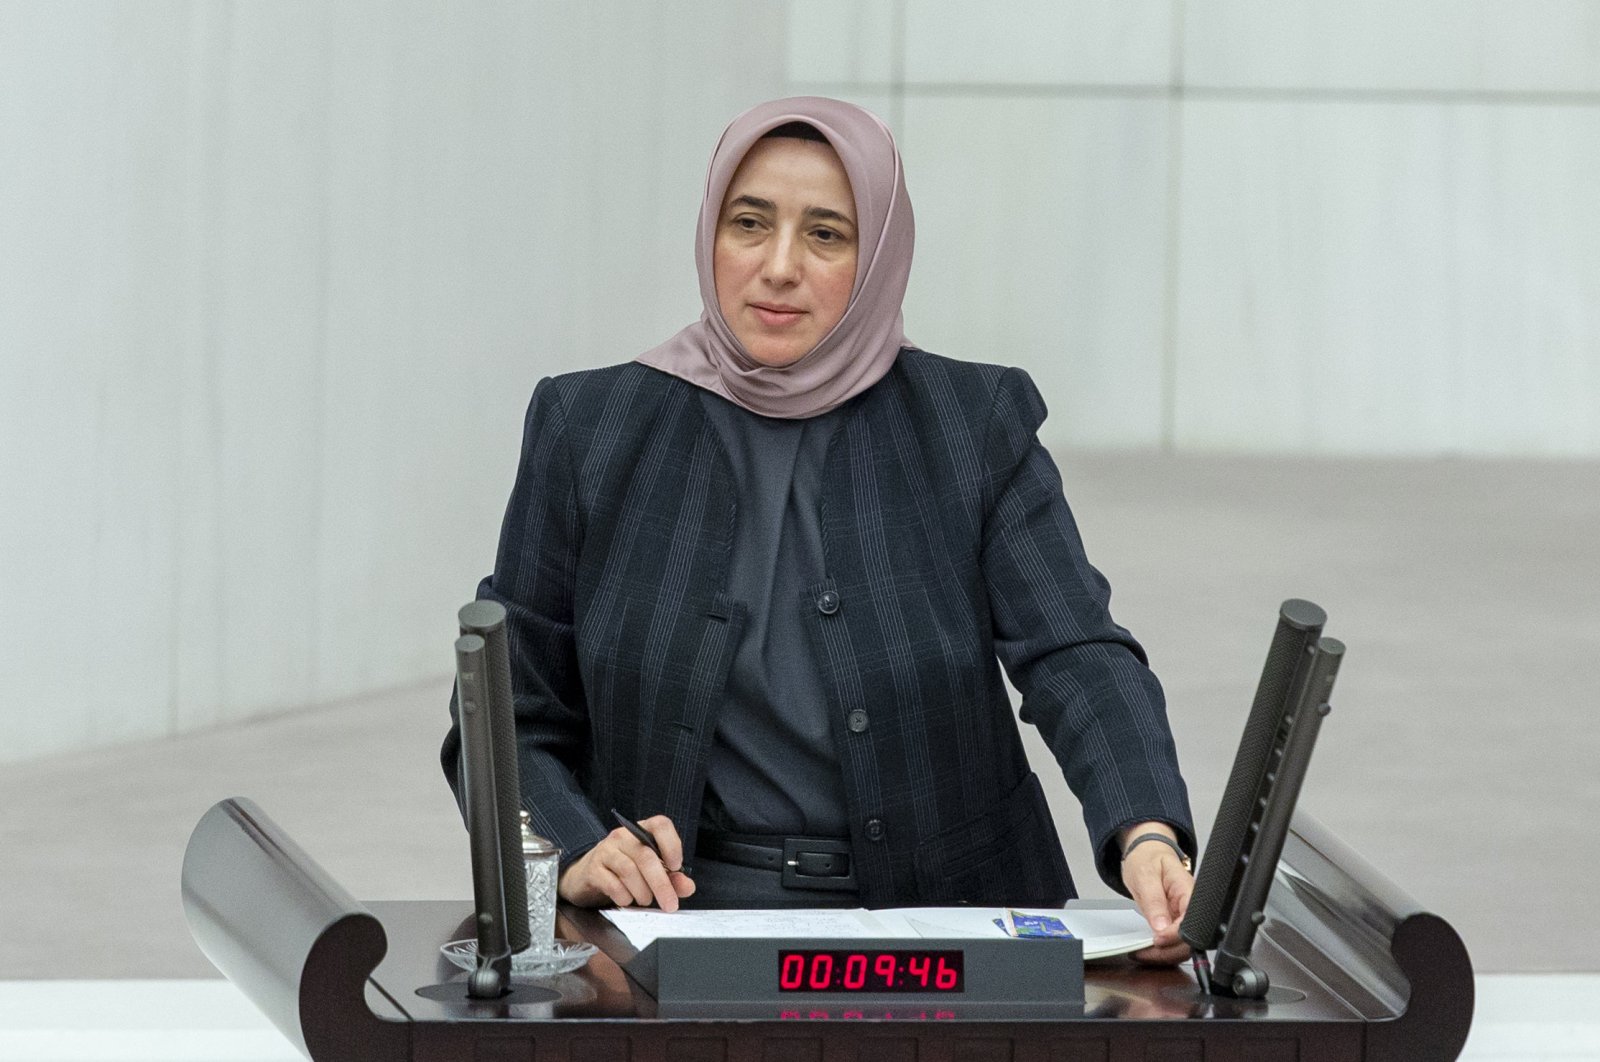 Justice and Development Party’s (AK Party) group deputy chair, Özlem Zengin, makes a speech at the Turkish parliament, Oct. 21, 2019. (AA)